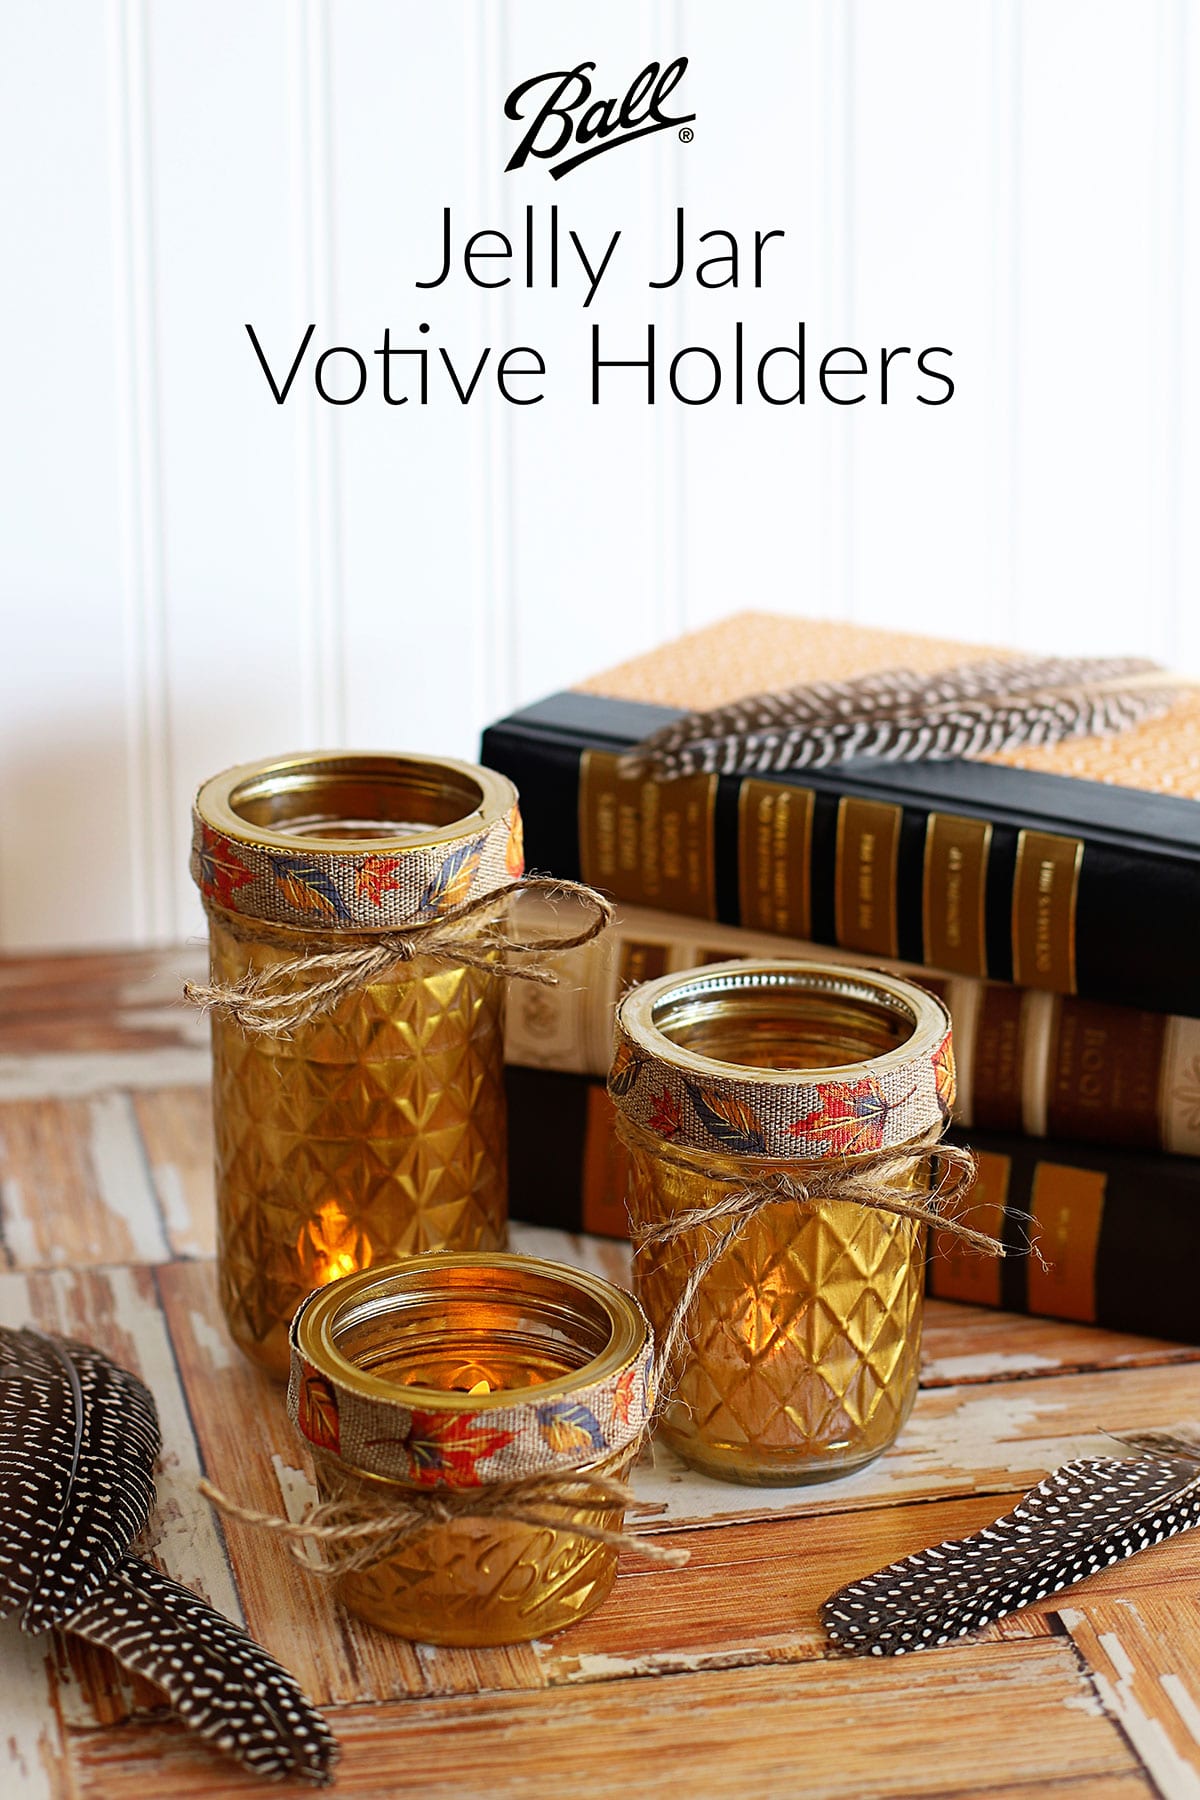 Gold votive holders made from mason jars are setting on a wooden background with feathers and books.